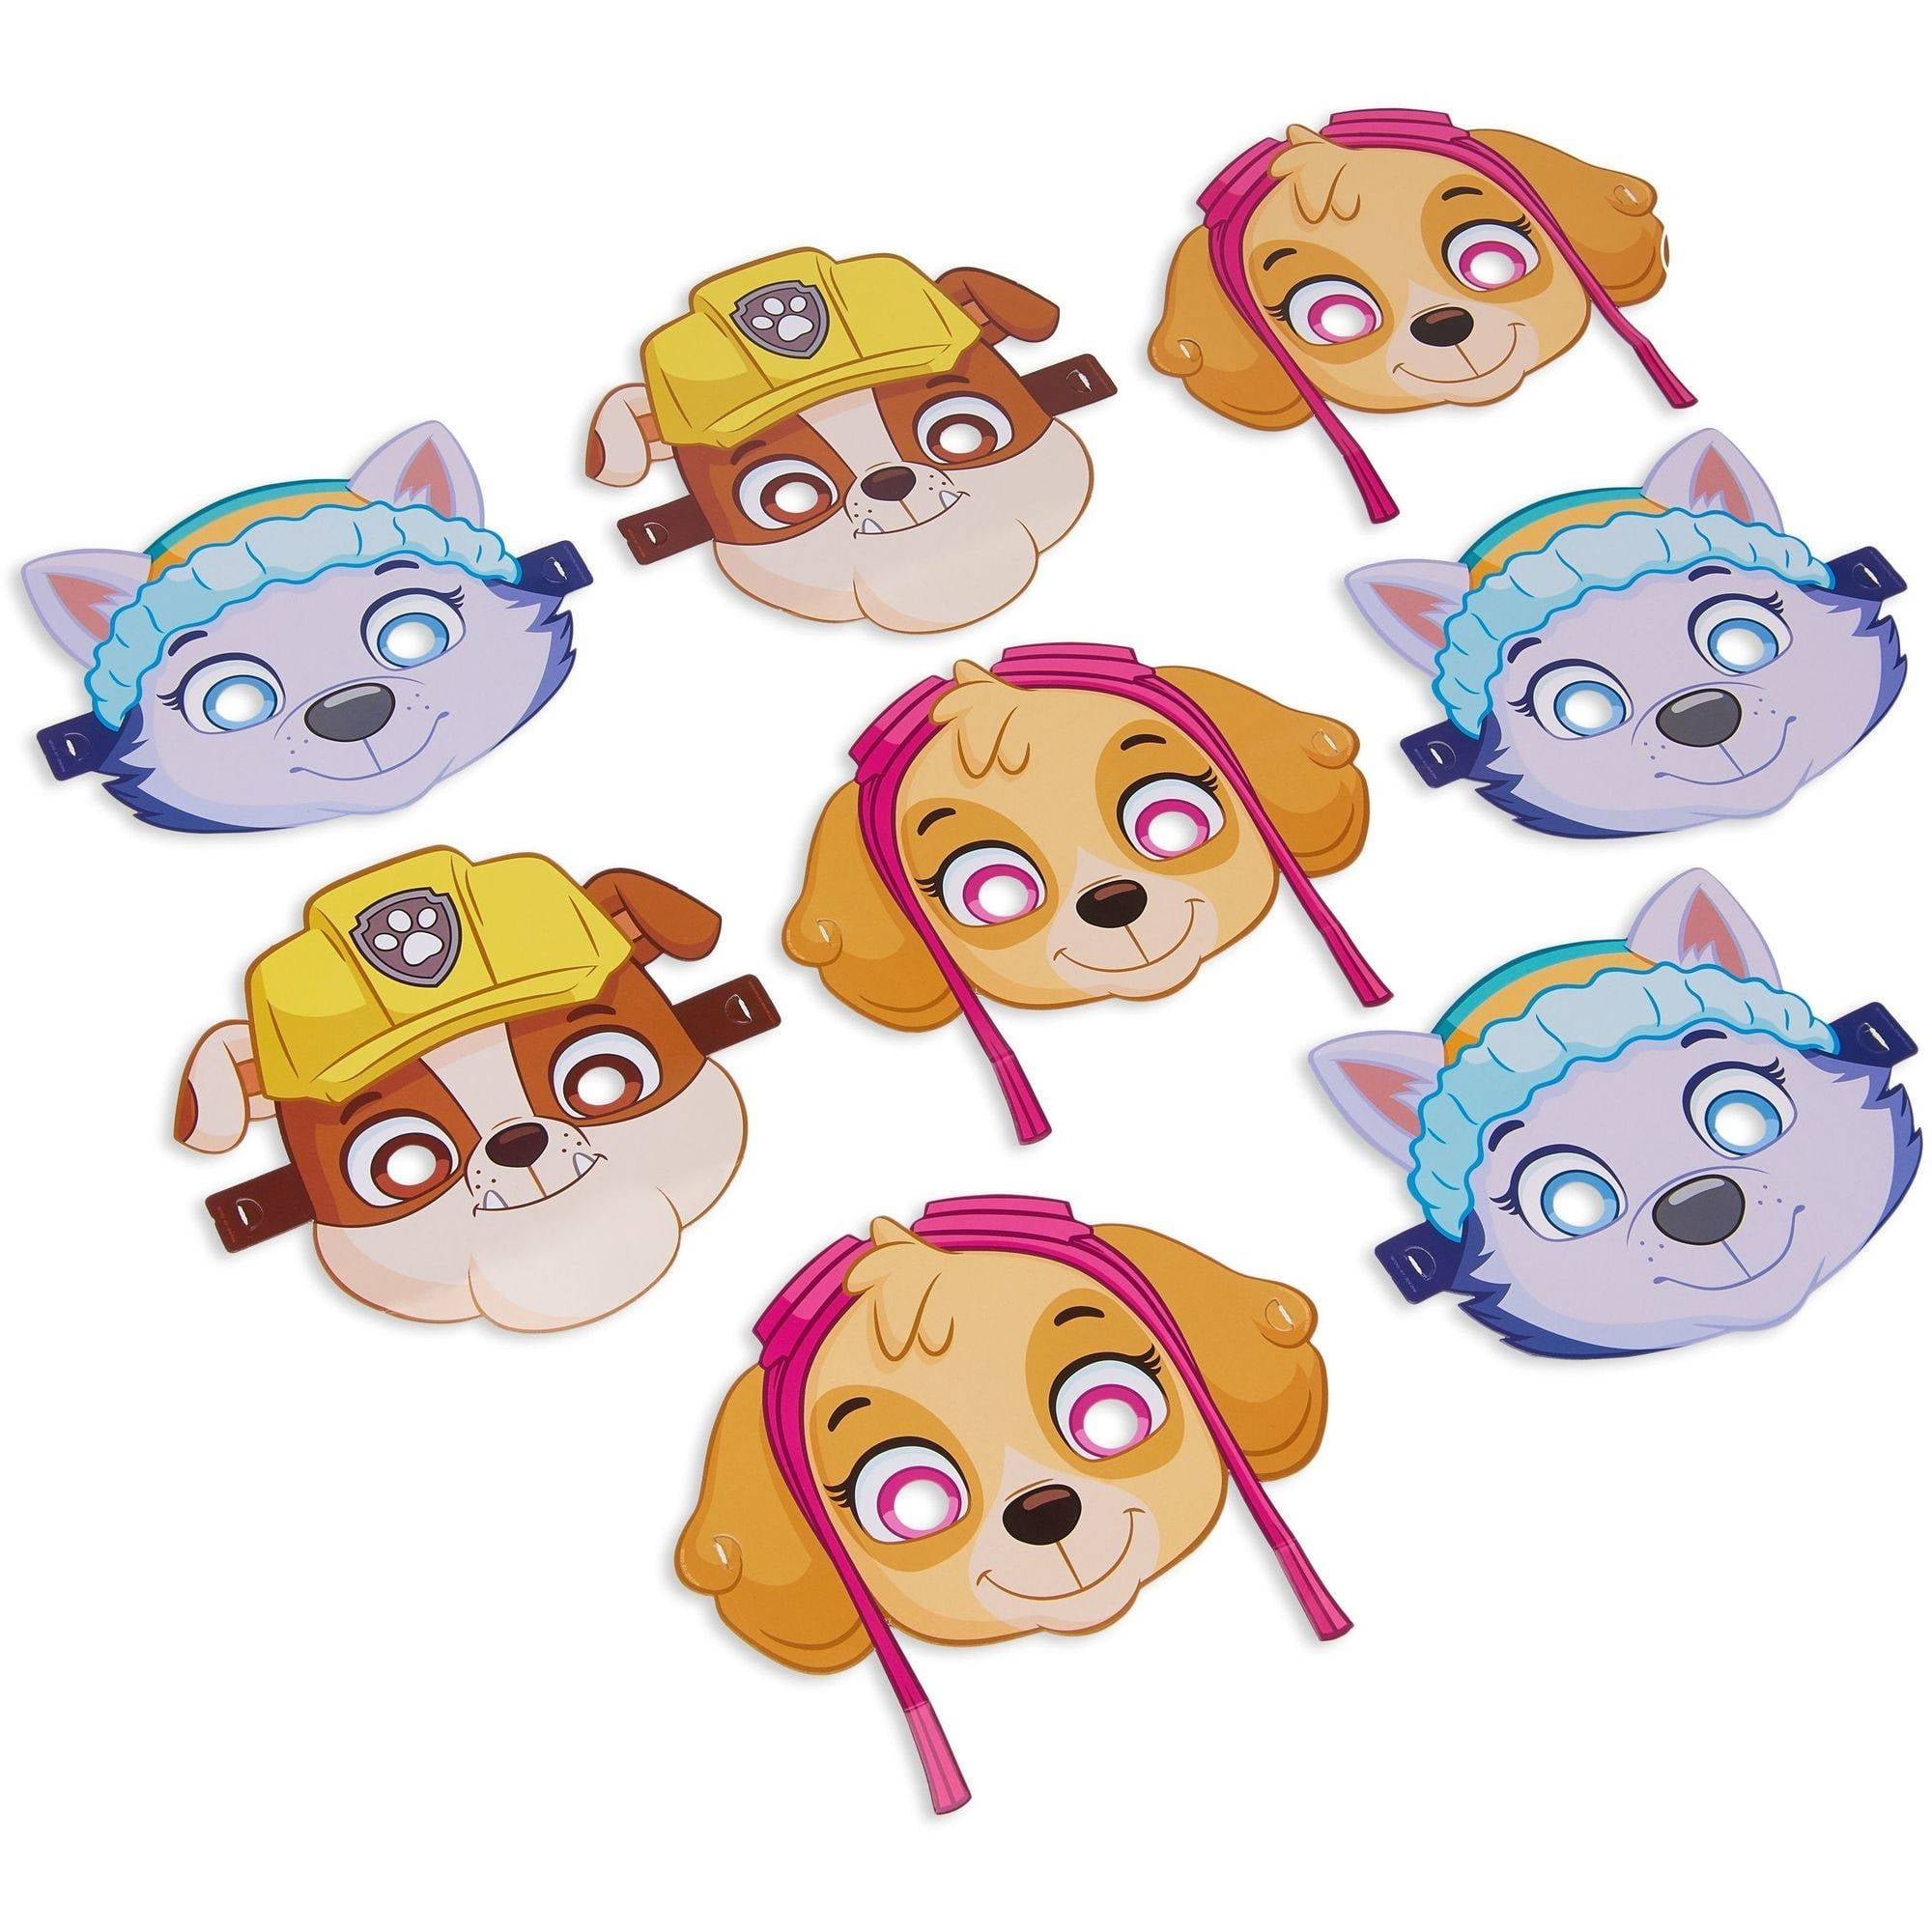 Paw Patrol 8 Paper Face Masks Birthday Party 4 designs Skye 